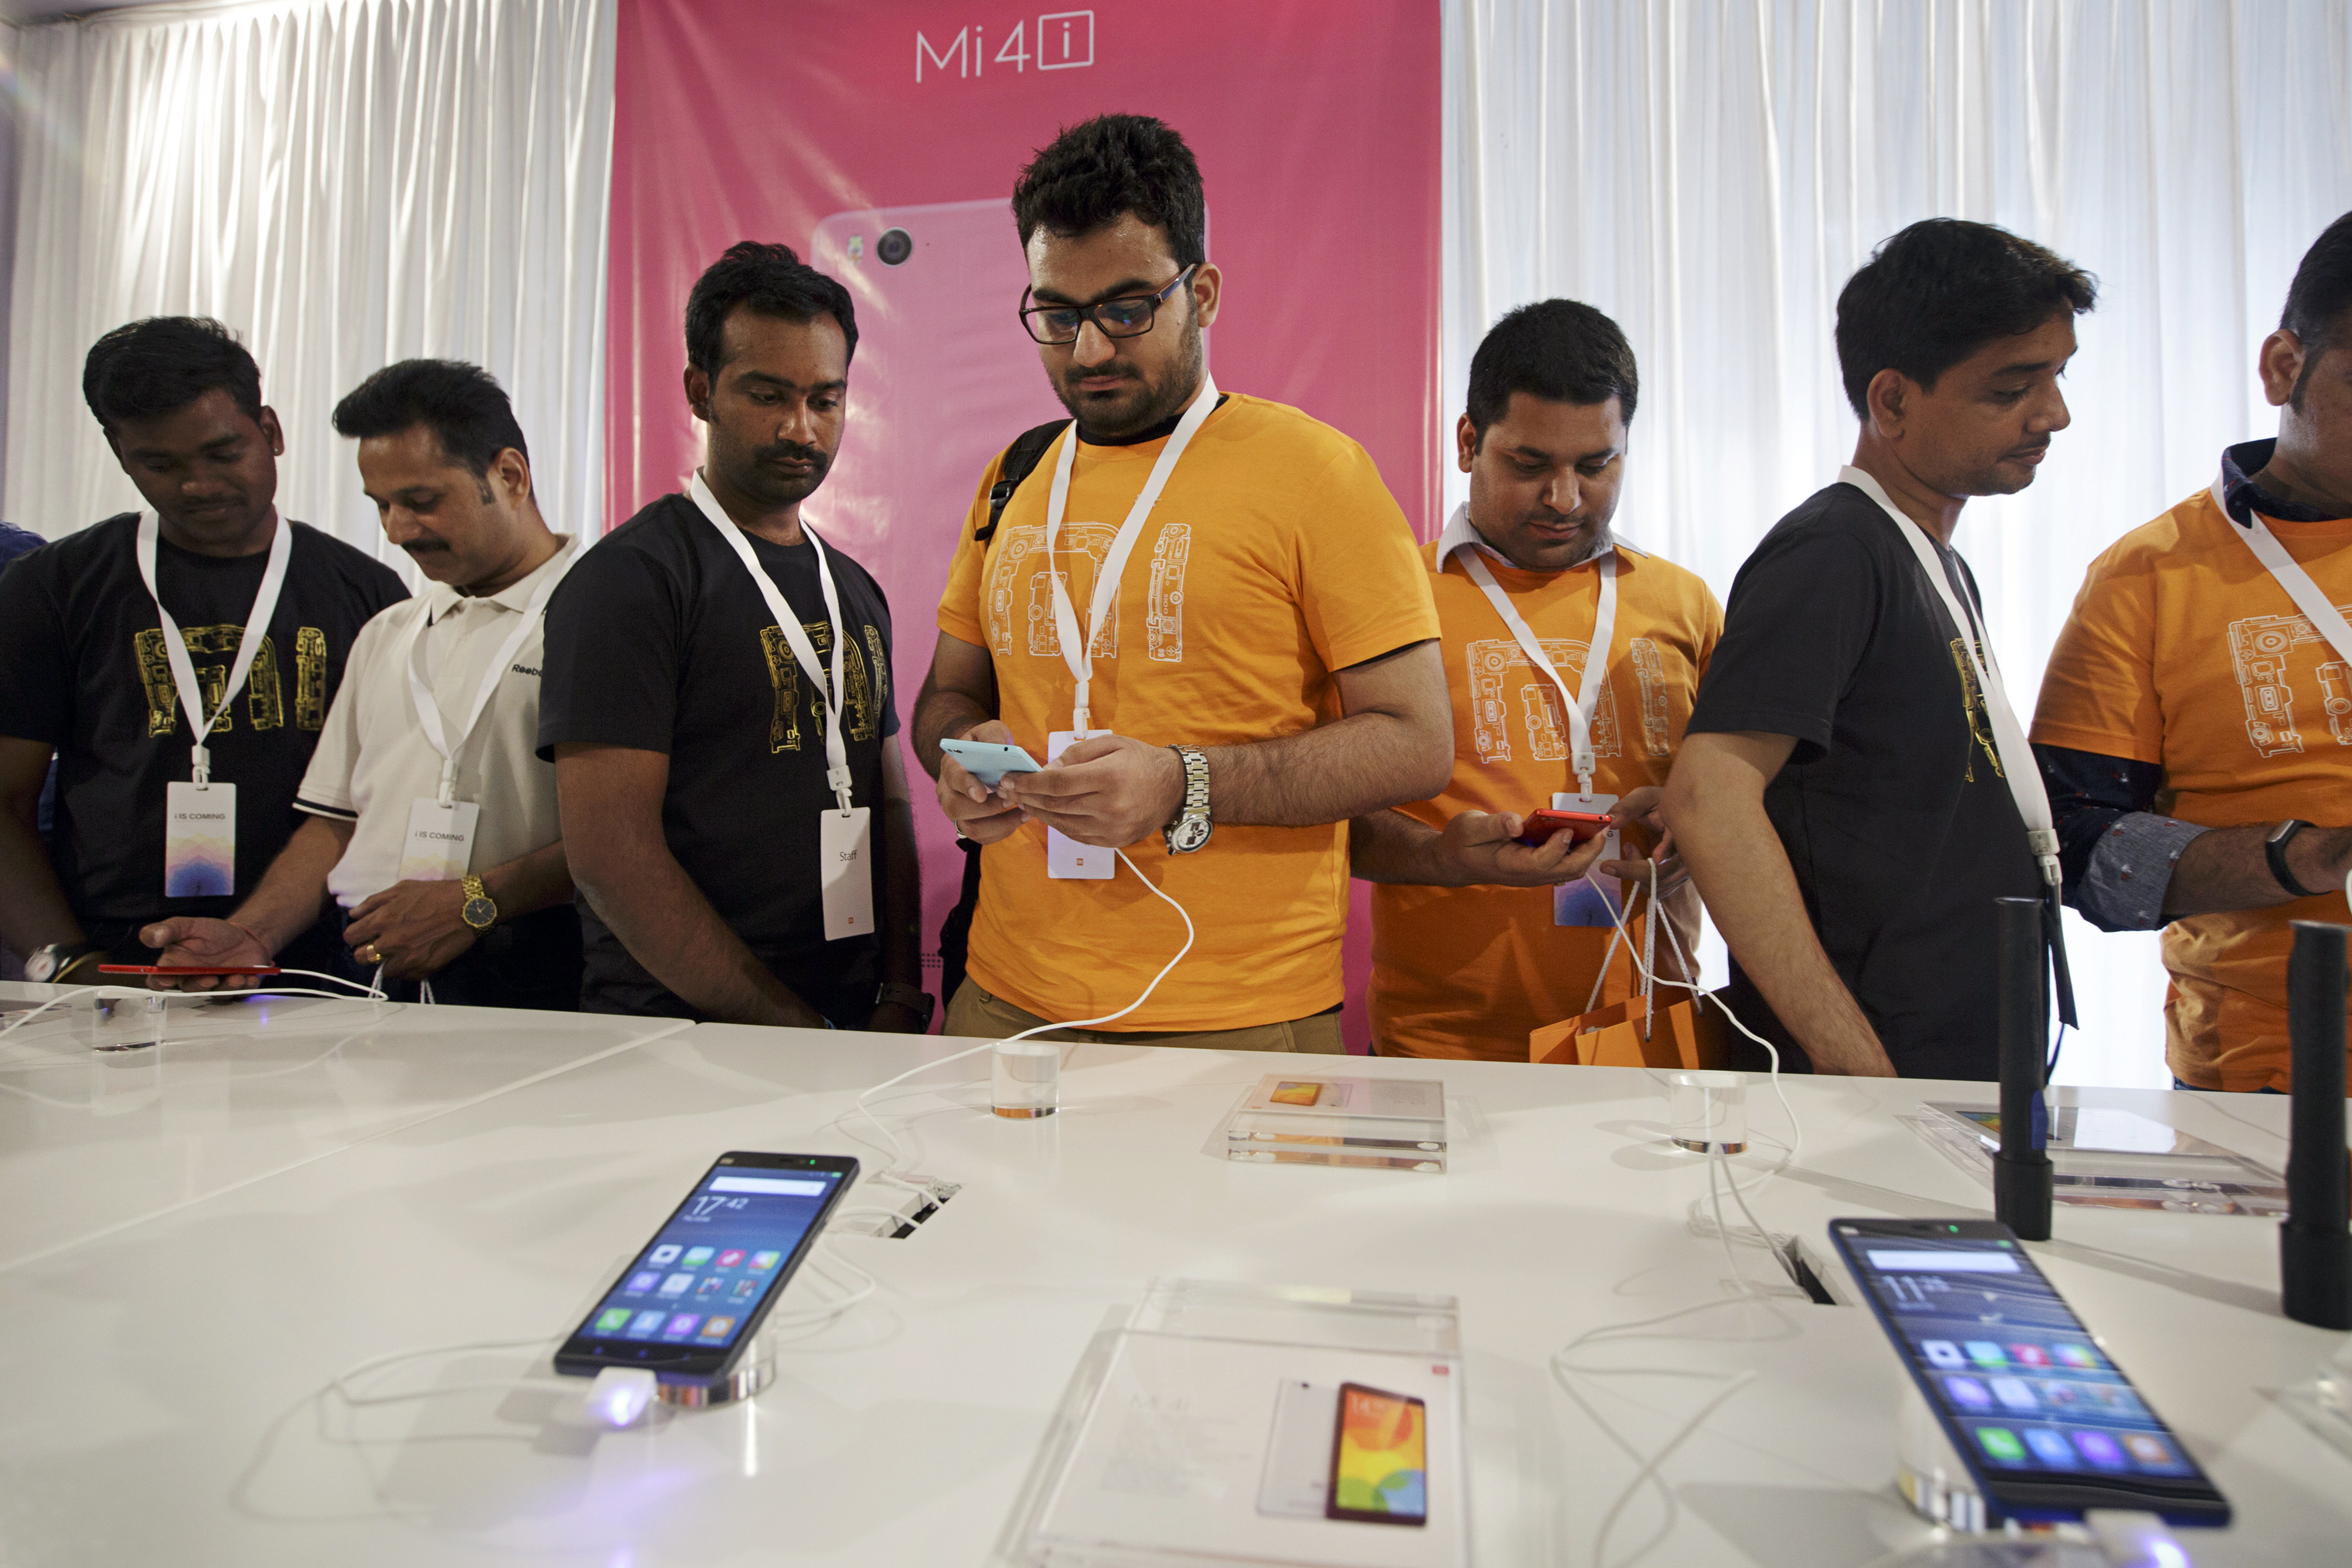 Xiaomi launched its Mi 4i smartphone in India in April as it looks to build its presence in the fast-growing market. Photo: Bloomberg.